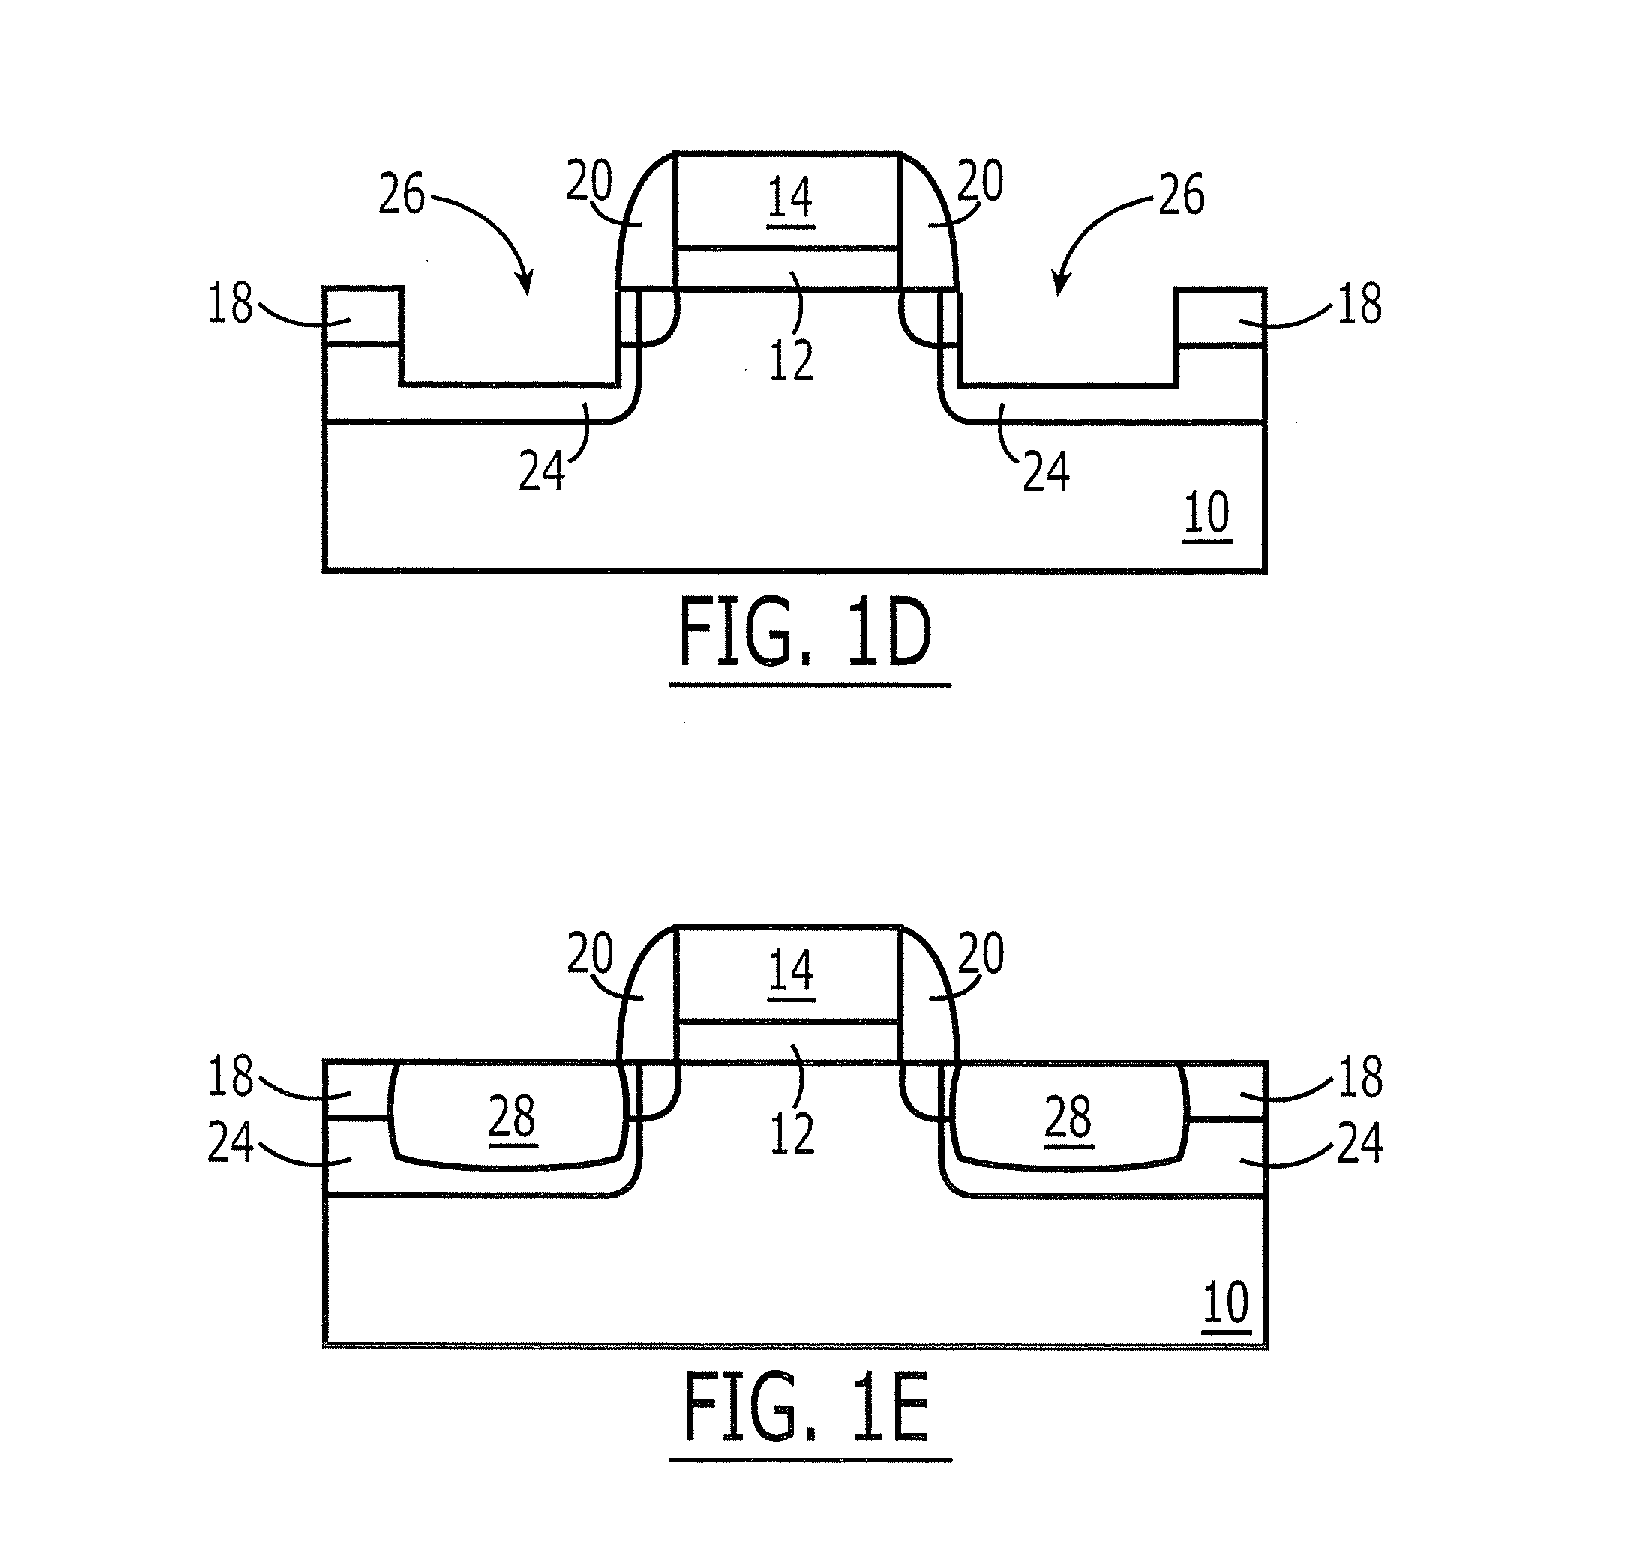 Methods of Forming Field Effect Transistors Having Silicon-Germanium Source and Drain Regions